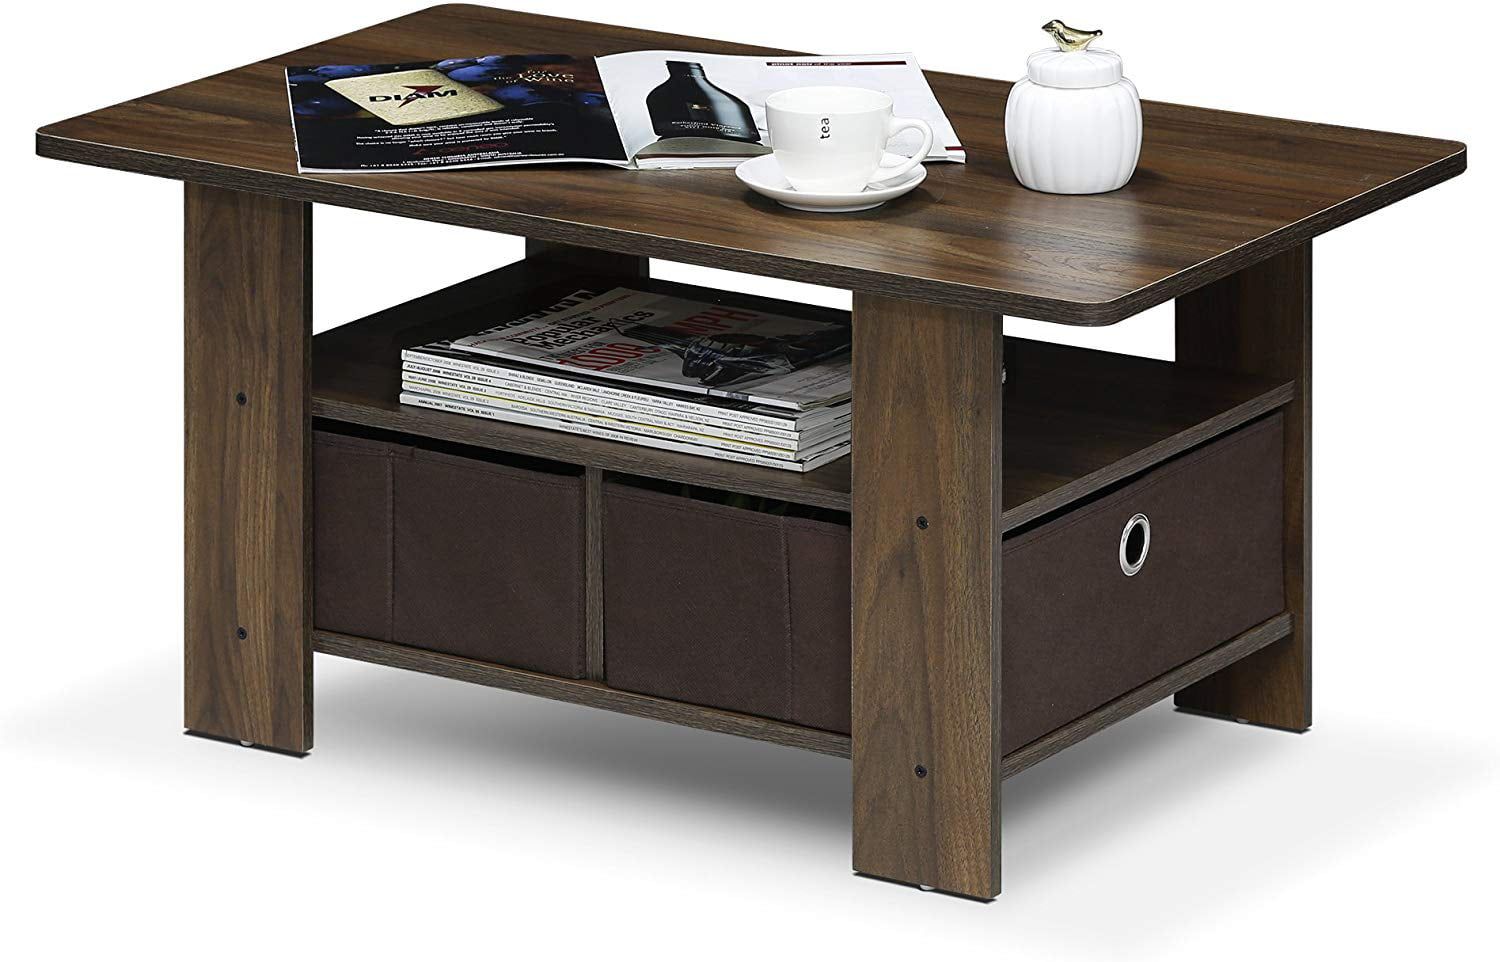 Simple Design Coffee Table With Storage, Black Coffee Table, Square Inside Simple Design Coffee Tables (Gallery 19 of 20)